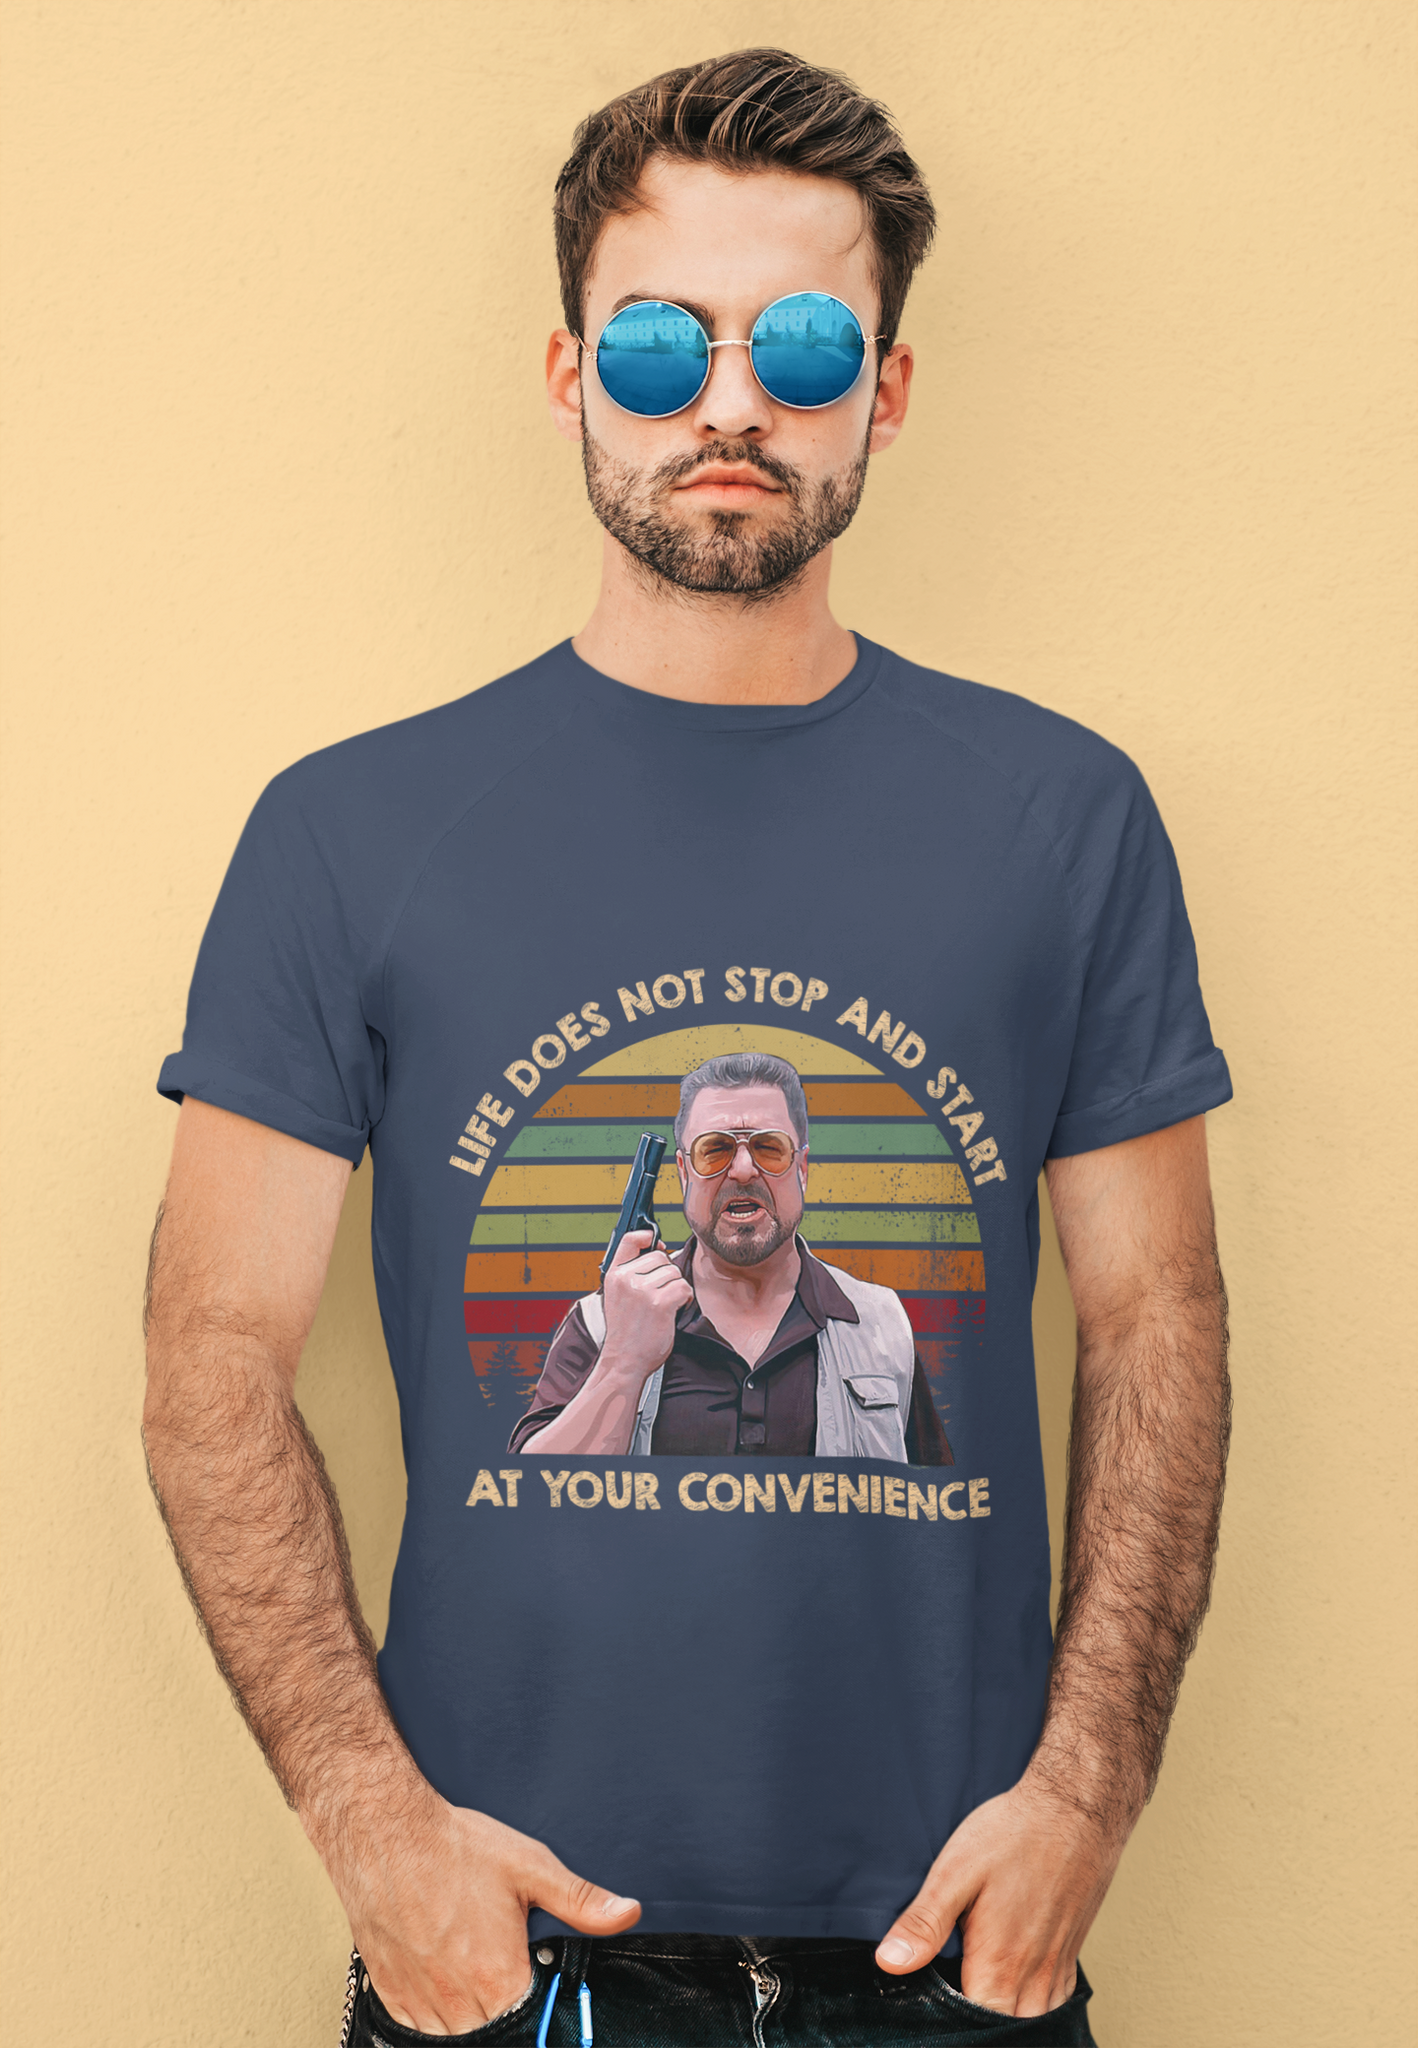 The Big Lebowski Vintage T Shirt, Life Doesnt Stop And Start At Your Convenience Tshirt, Walter Sobchak T Shirt